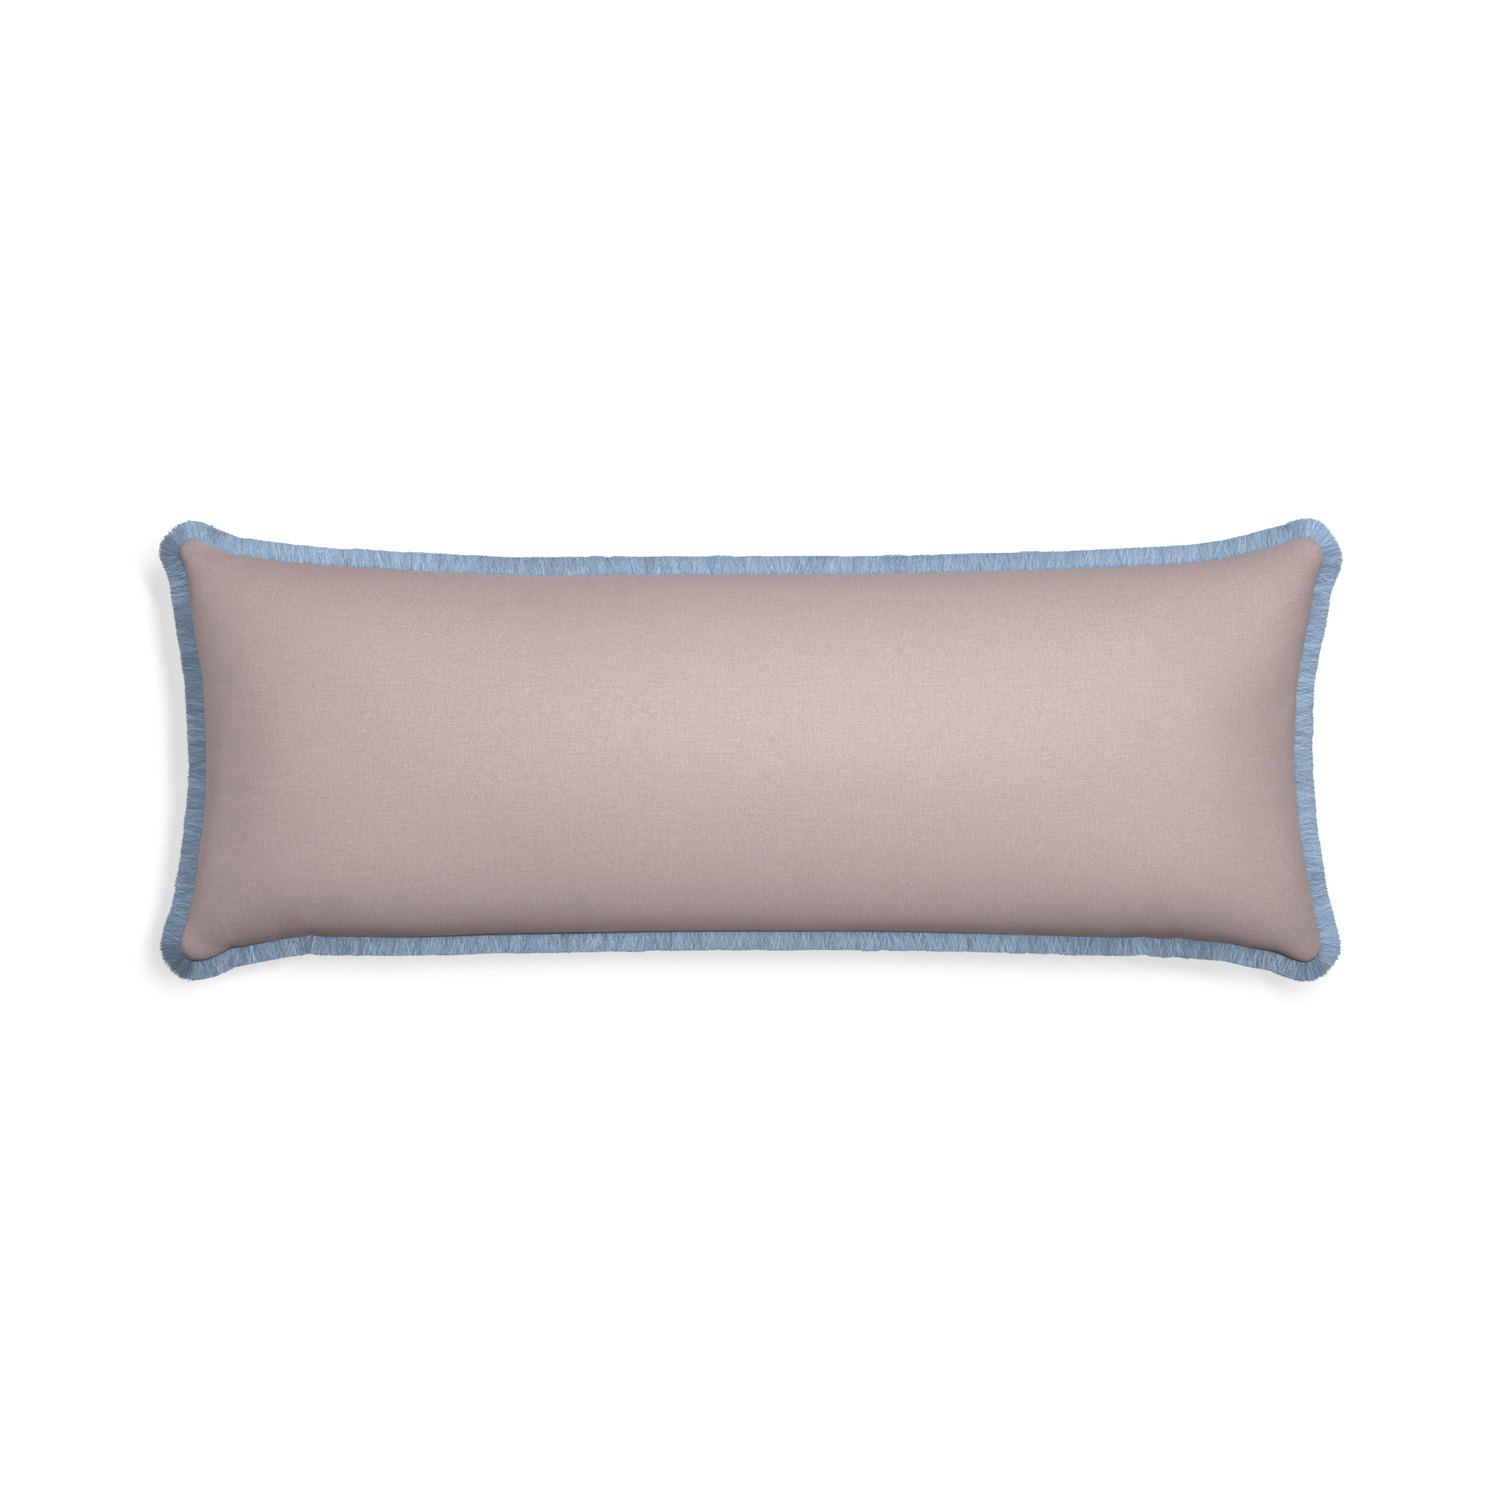 Xl-lumbar orchid custom mauve pinkpillow with sky fringe on white background